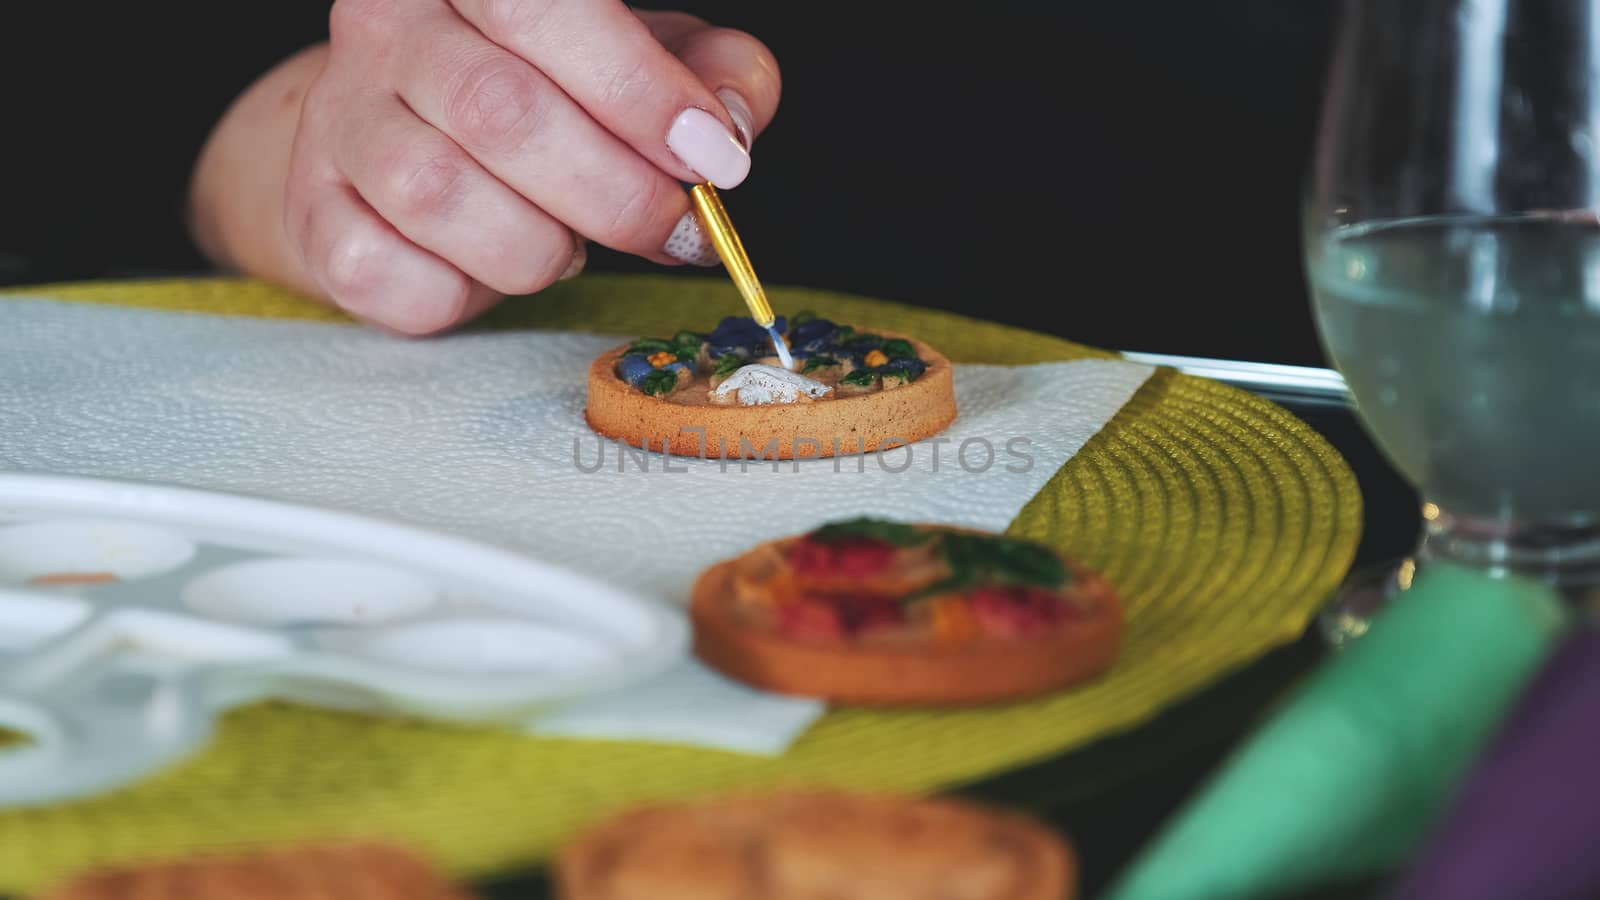 Cookies art decorating: woman painting cookies with brush and food colors on palette